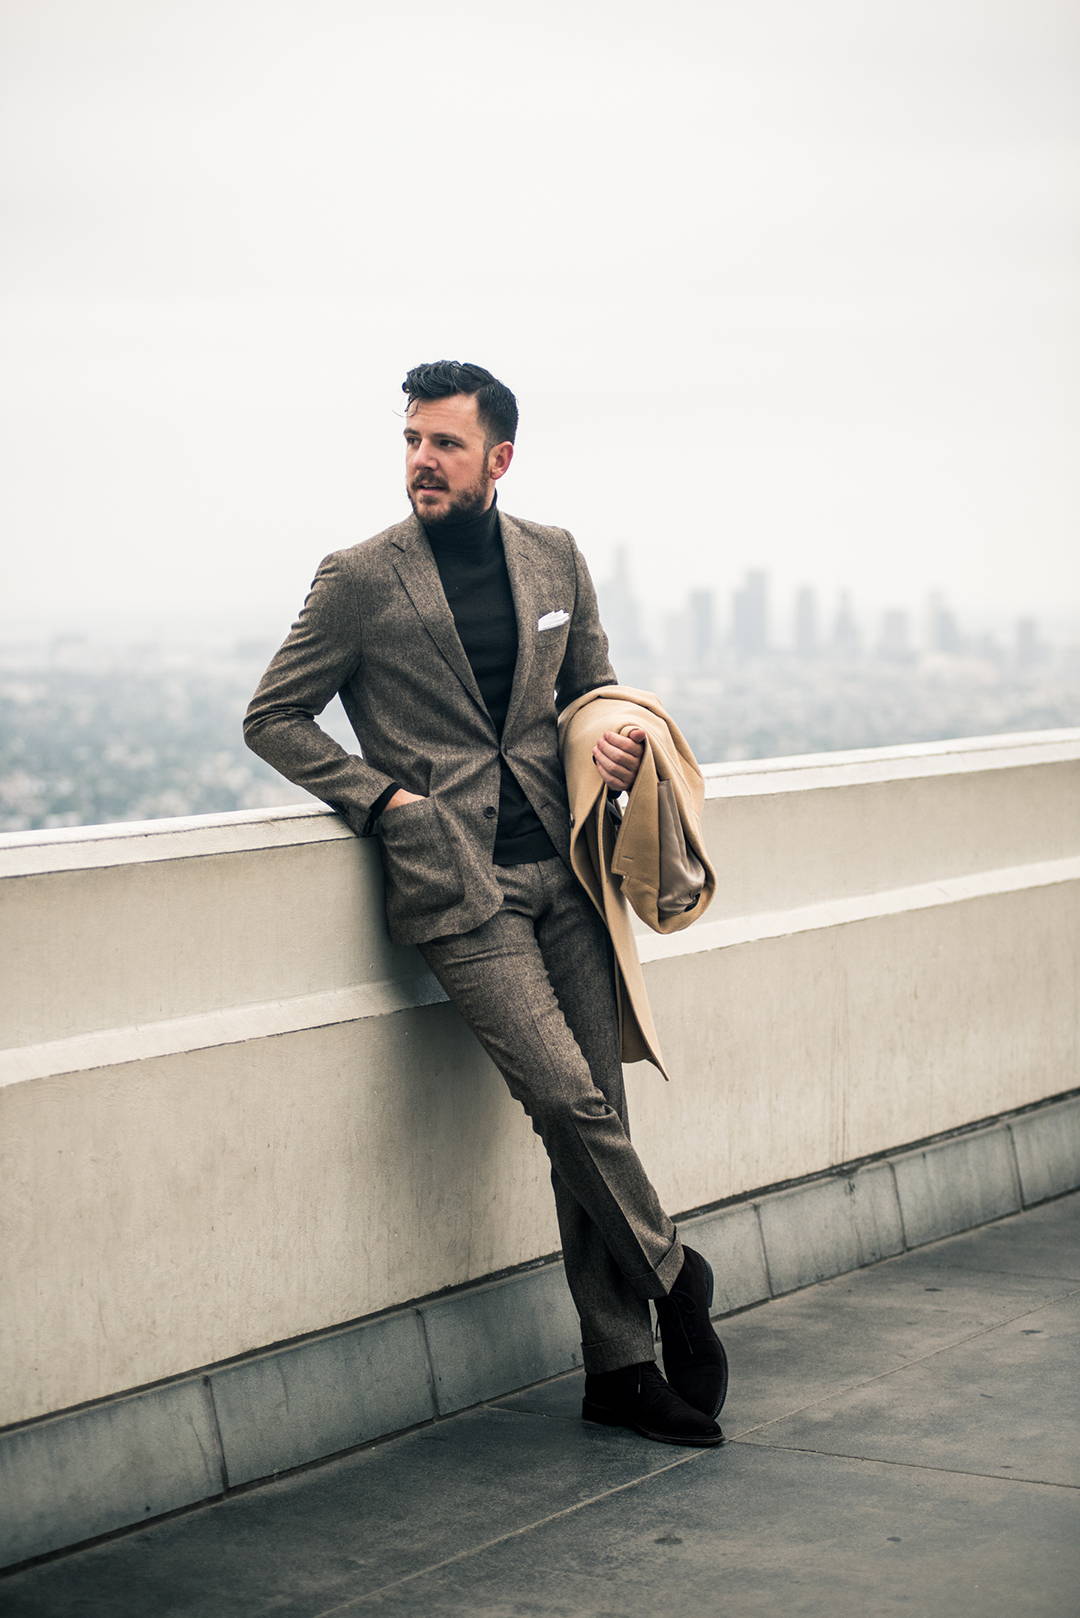 Articles of Style  1 Piece/5 Ways: The Tweed Suit